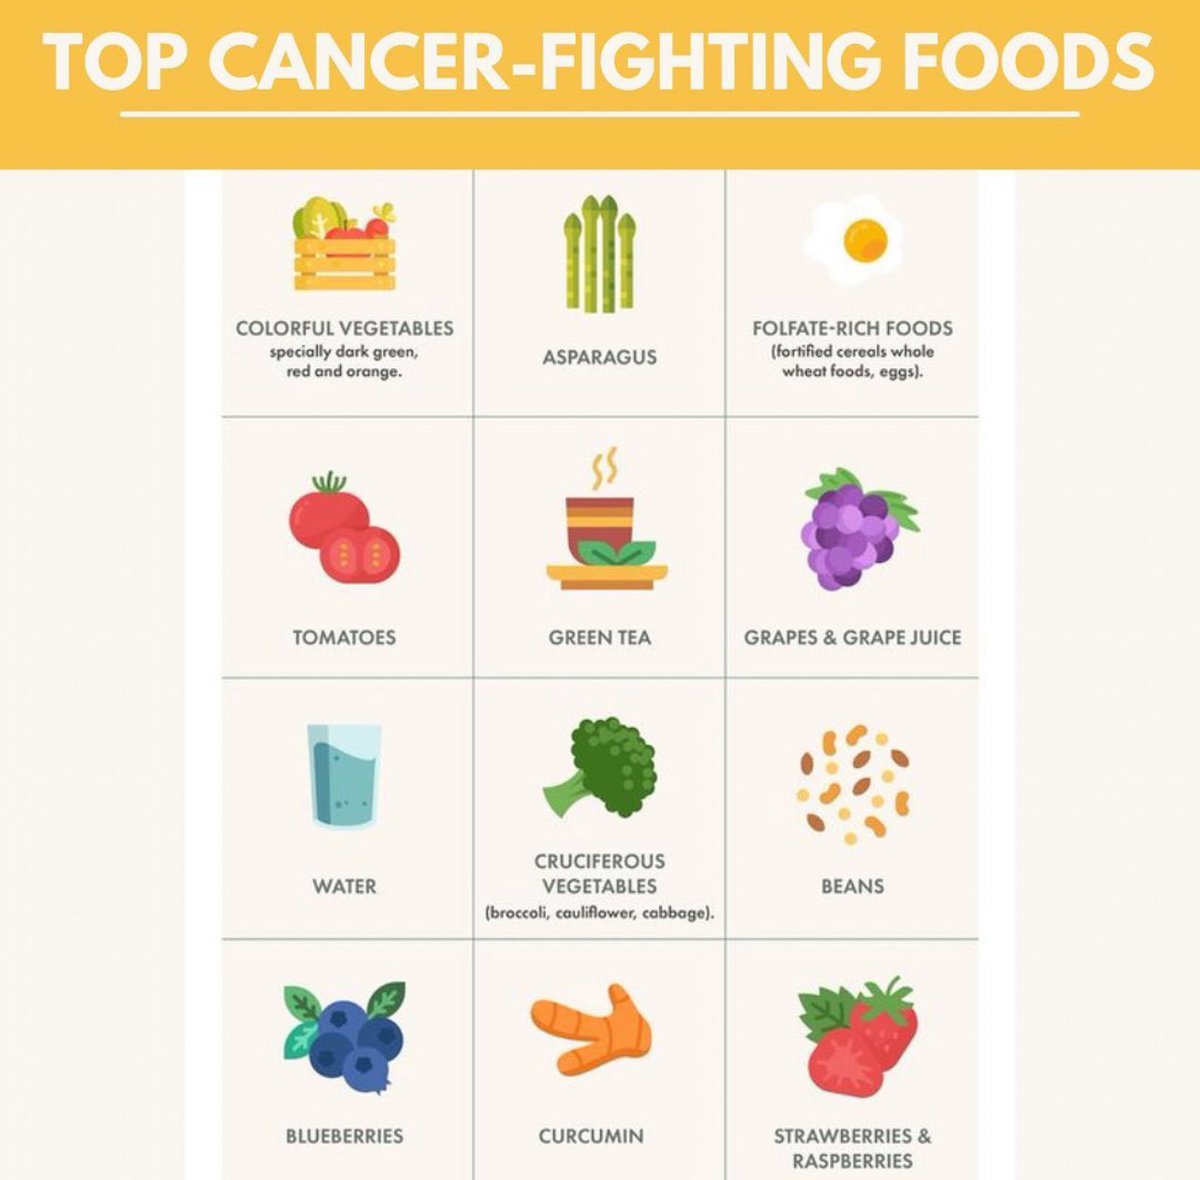 Food is medicine🥑🍒🥦 Fuel your body with these cancer-fighting foods🍴 #mtjf #martintruexjrfoundation #nevergiveup #childhoodcancer